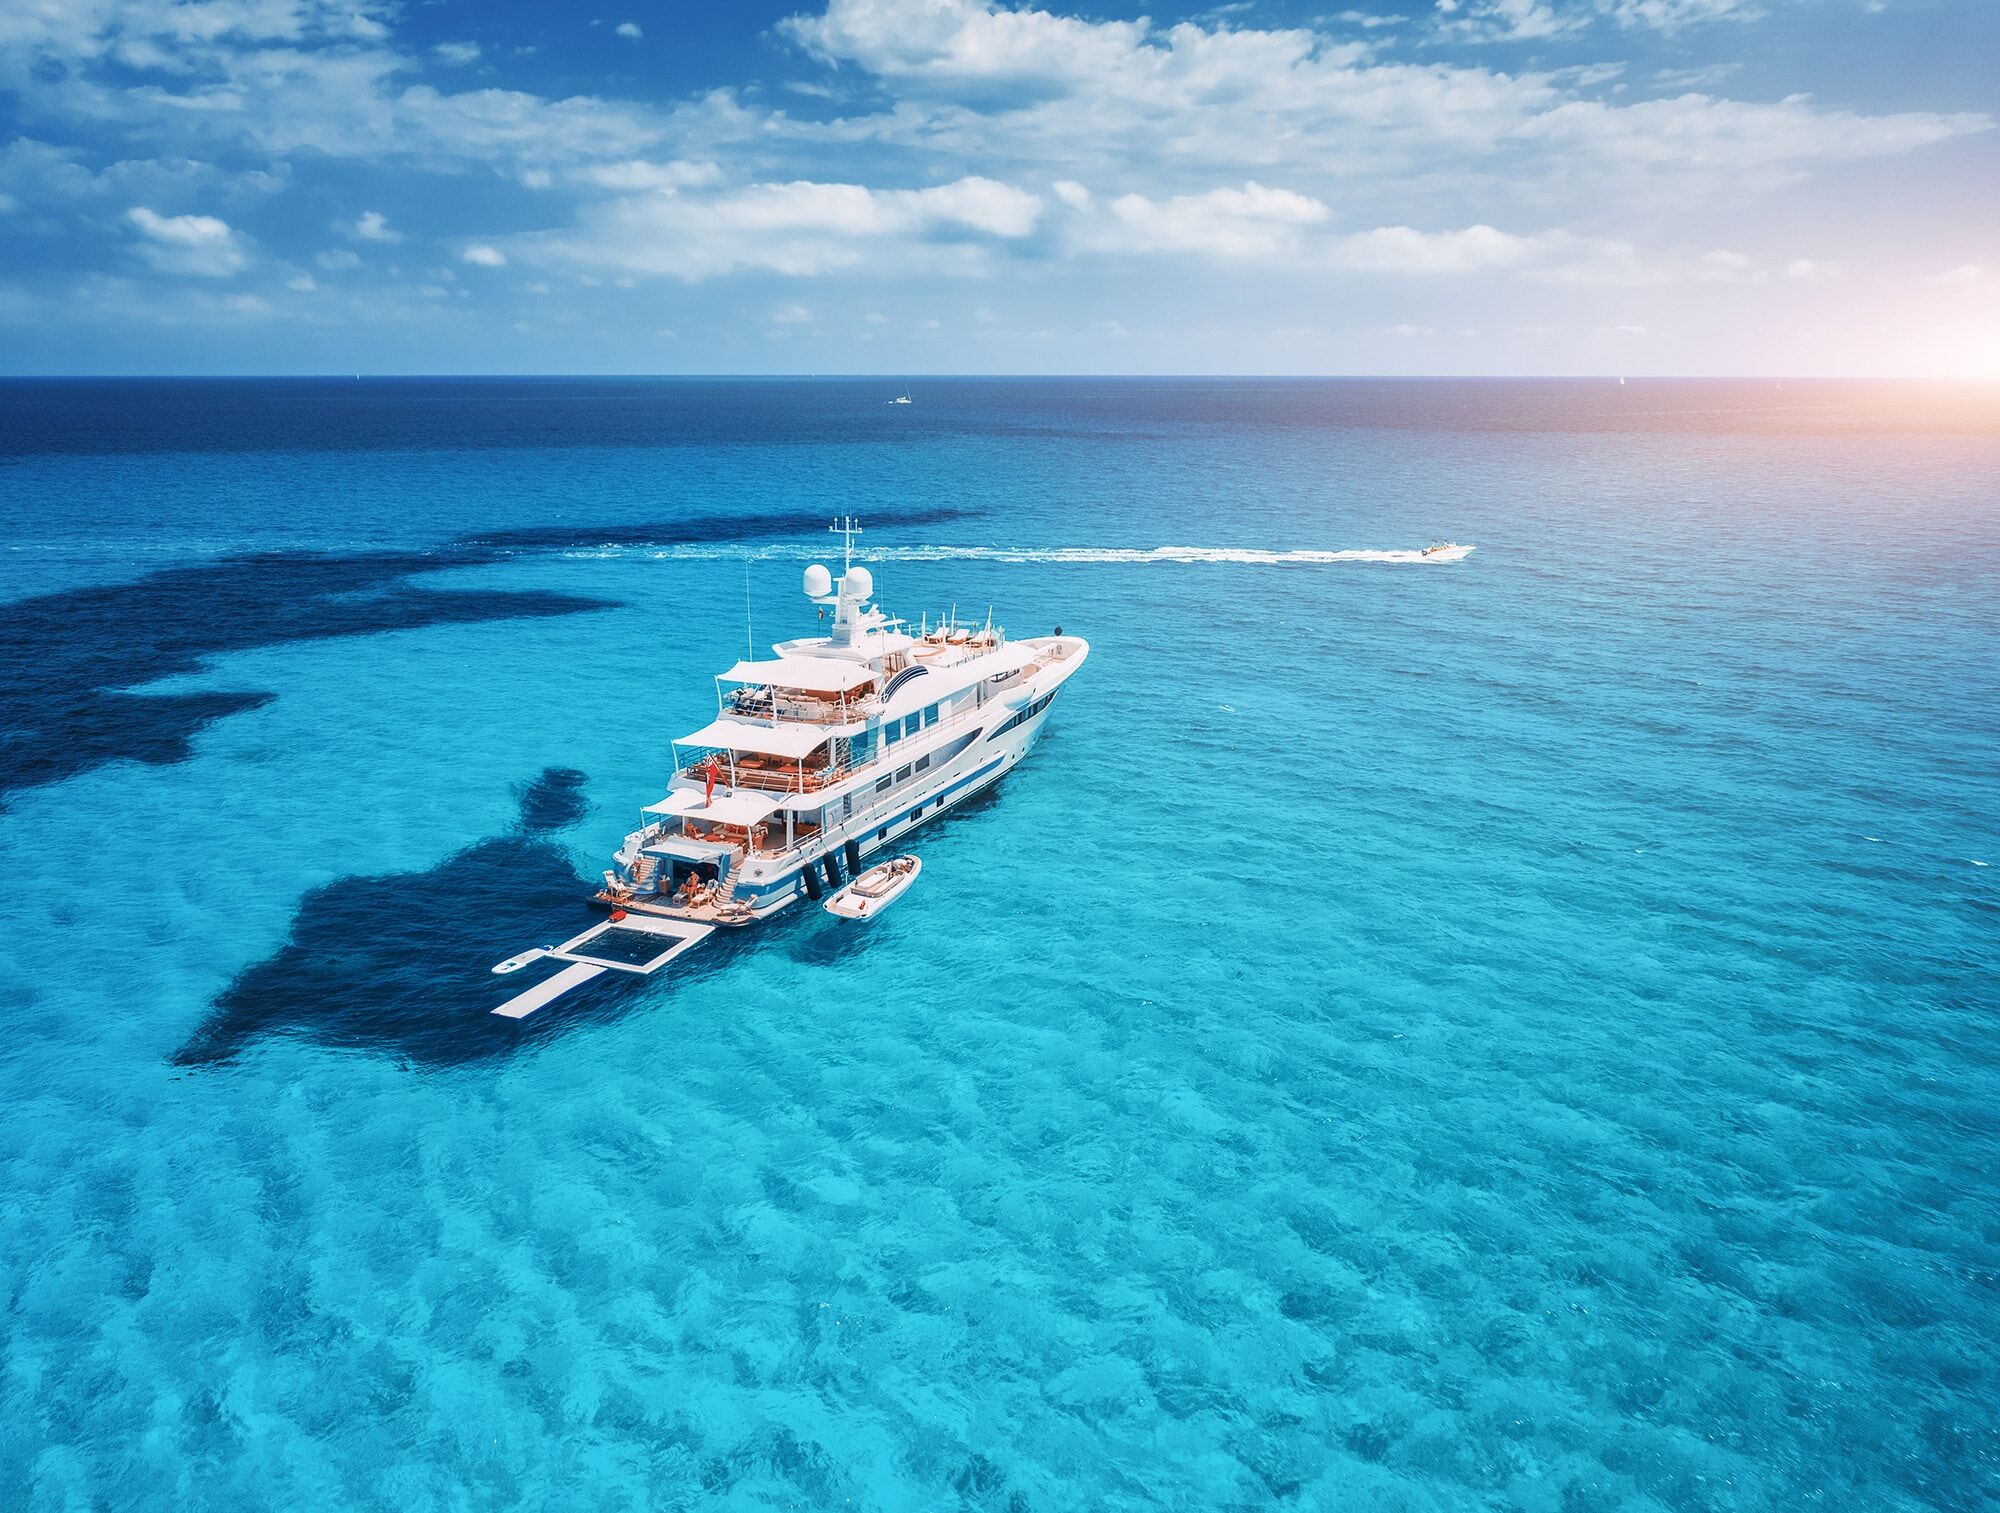 Luxury yacht charter on the ocean with a small boat in front